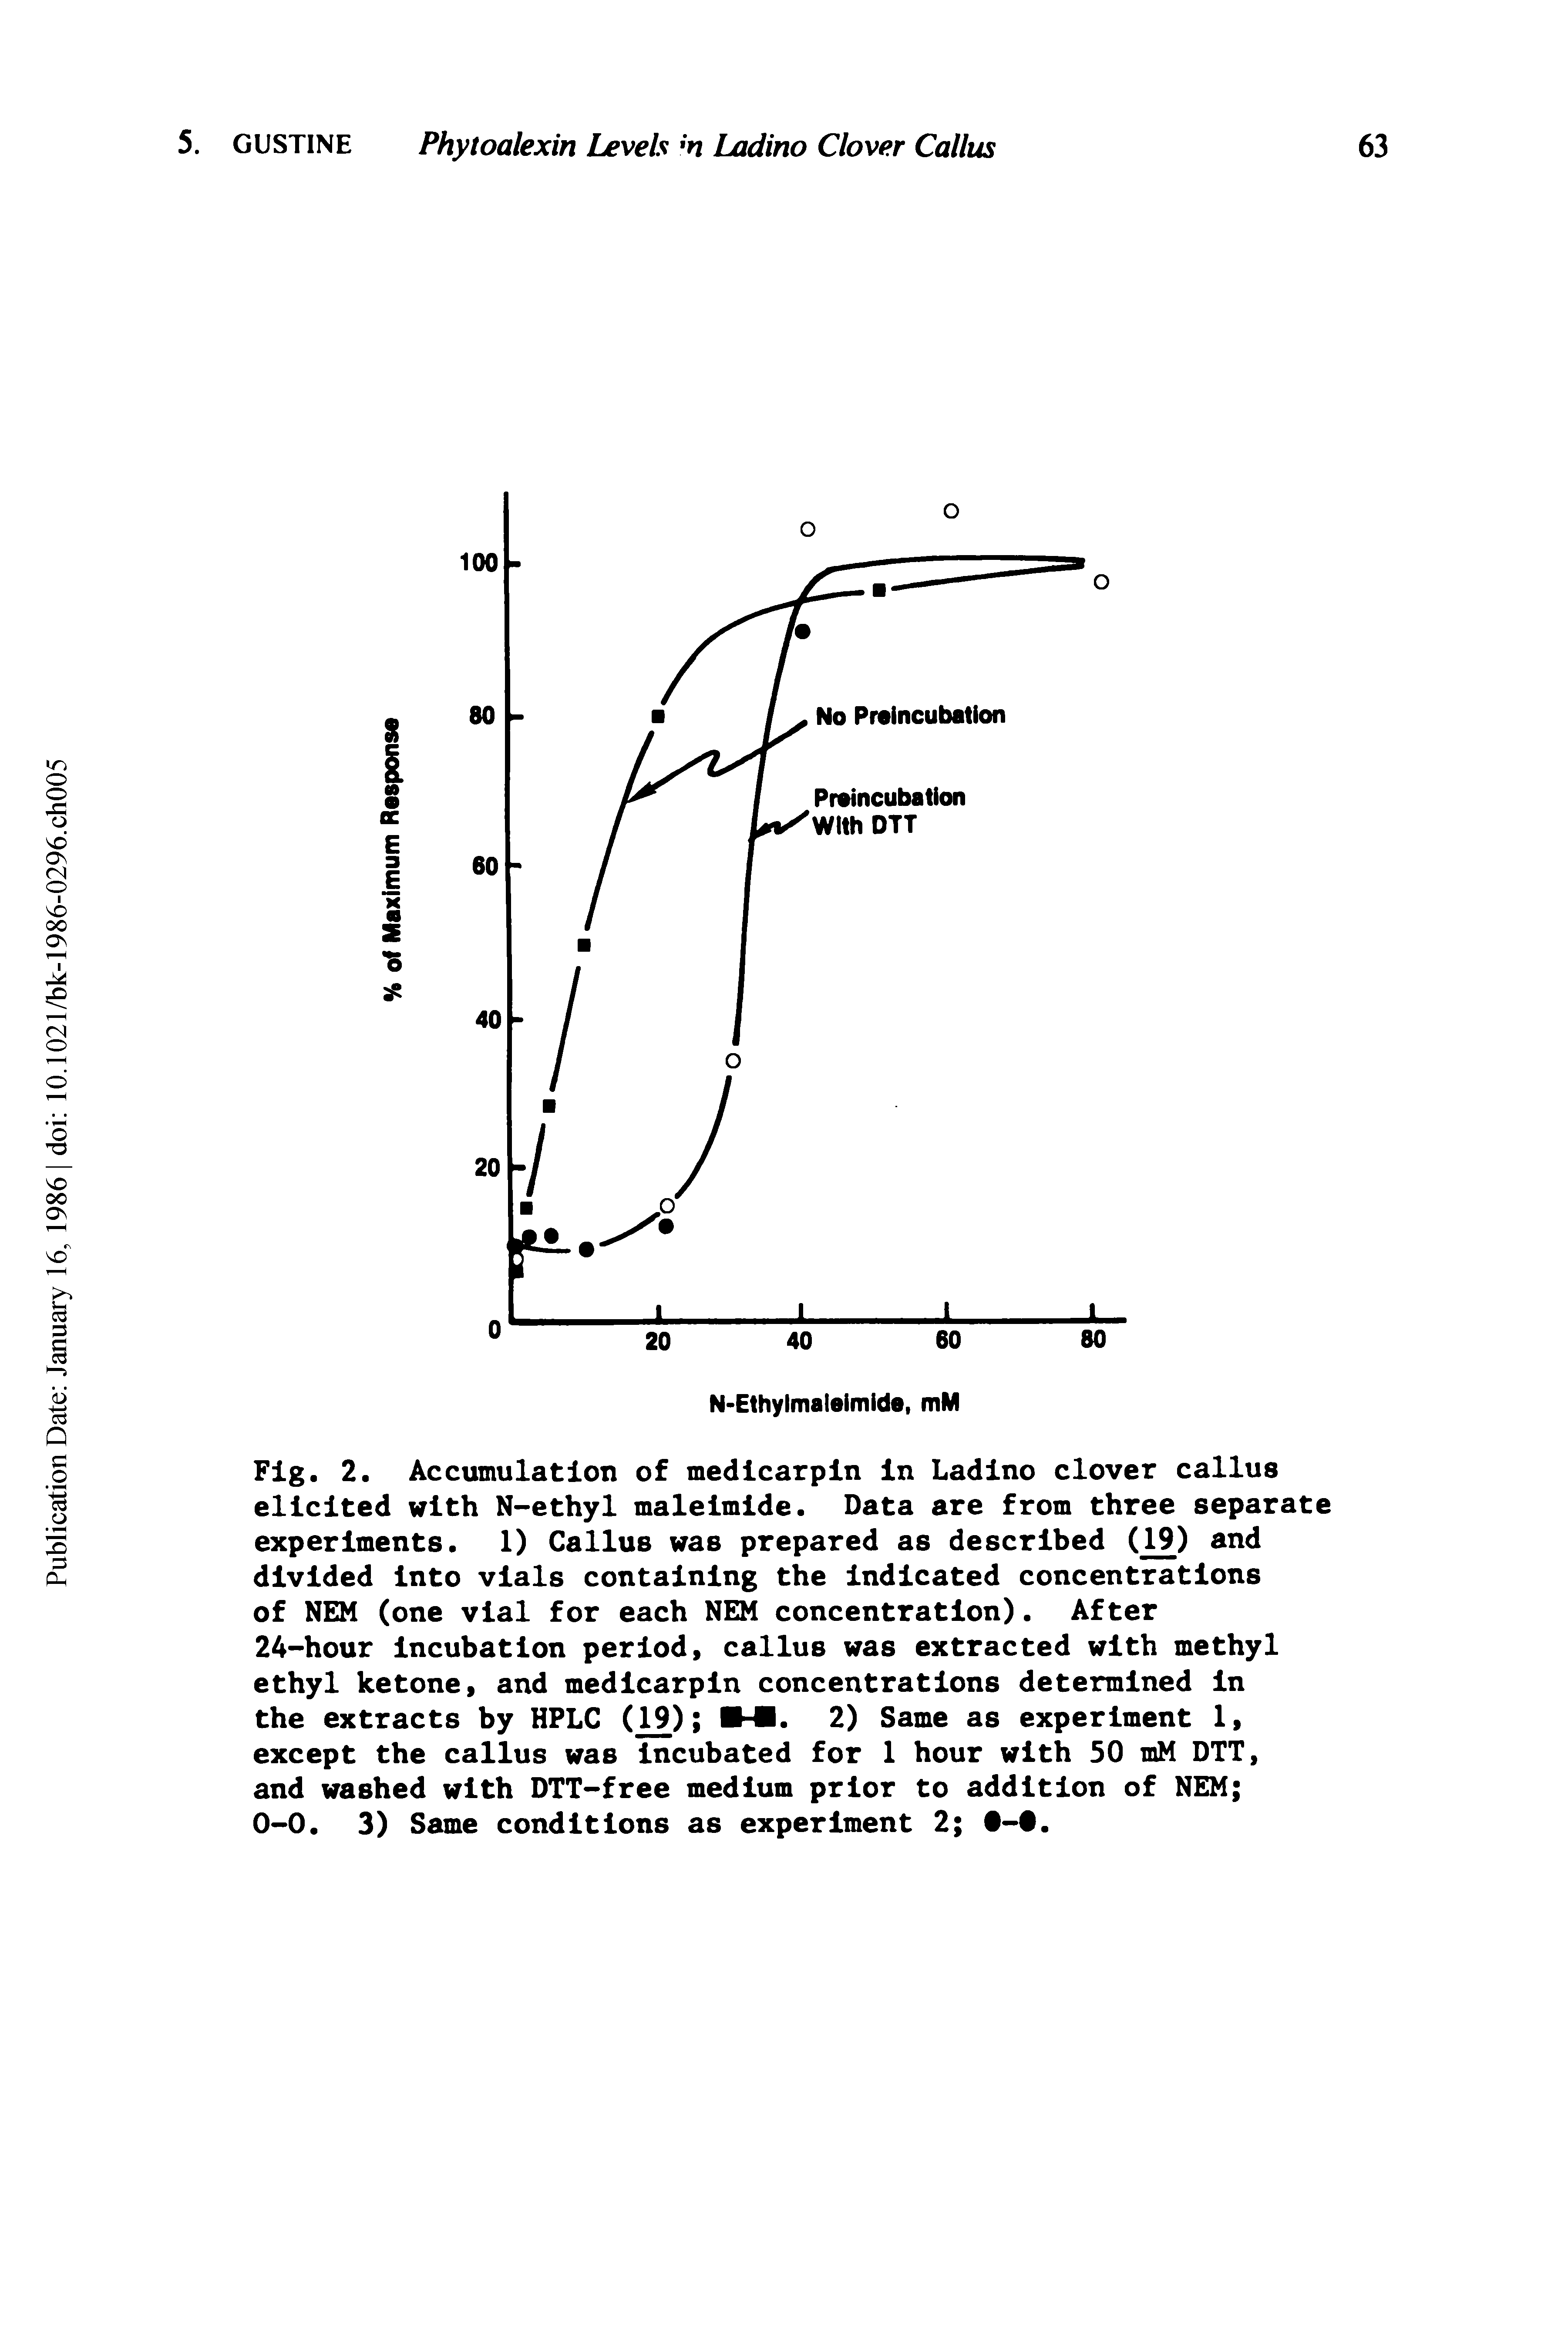 Fig. 2. Accumulation of medicarpin in Ladino clover callus elicited with N-ethyl maleimide. Data are from three separate experiments. 1) Callus was prepared as described (19) and divided into vials containing the indicated concentrations of NEM (one vial for each NEM concentration). After 24-hour incubation period, callus was extracted with methyl ethyl ketone, and medicarpin concentrations determined in the extracts by HPLC (19) - . 2) Same as experiment 1,...